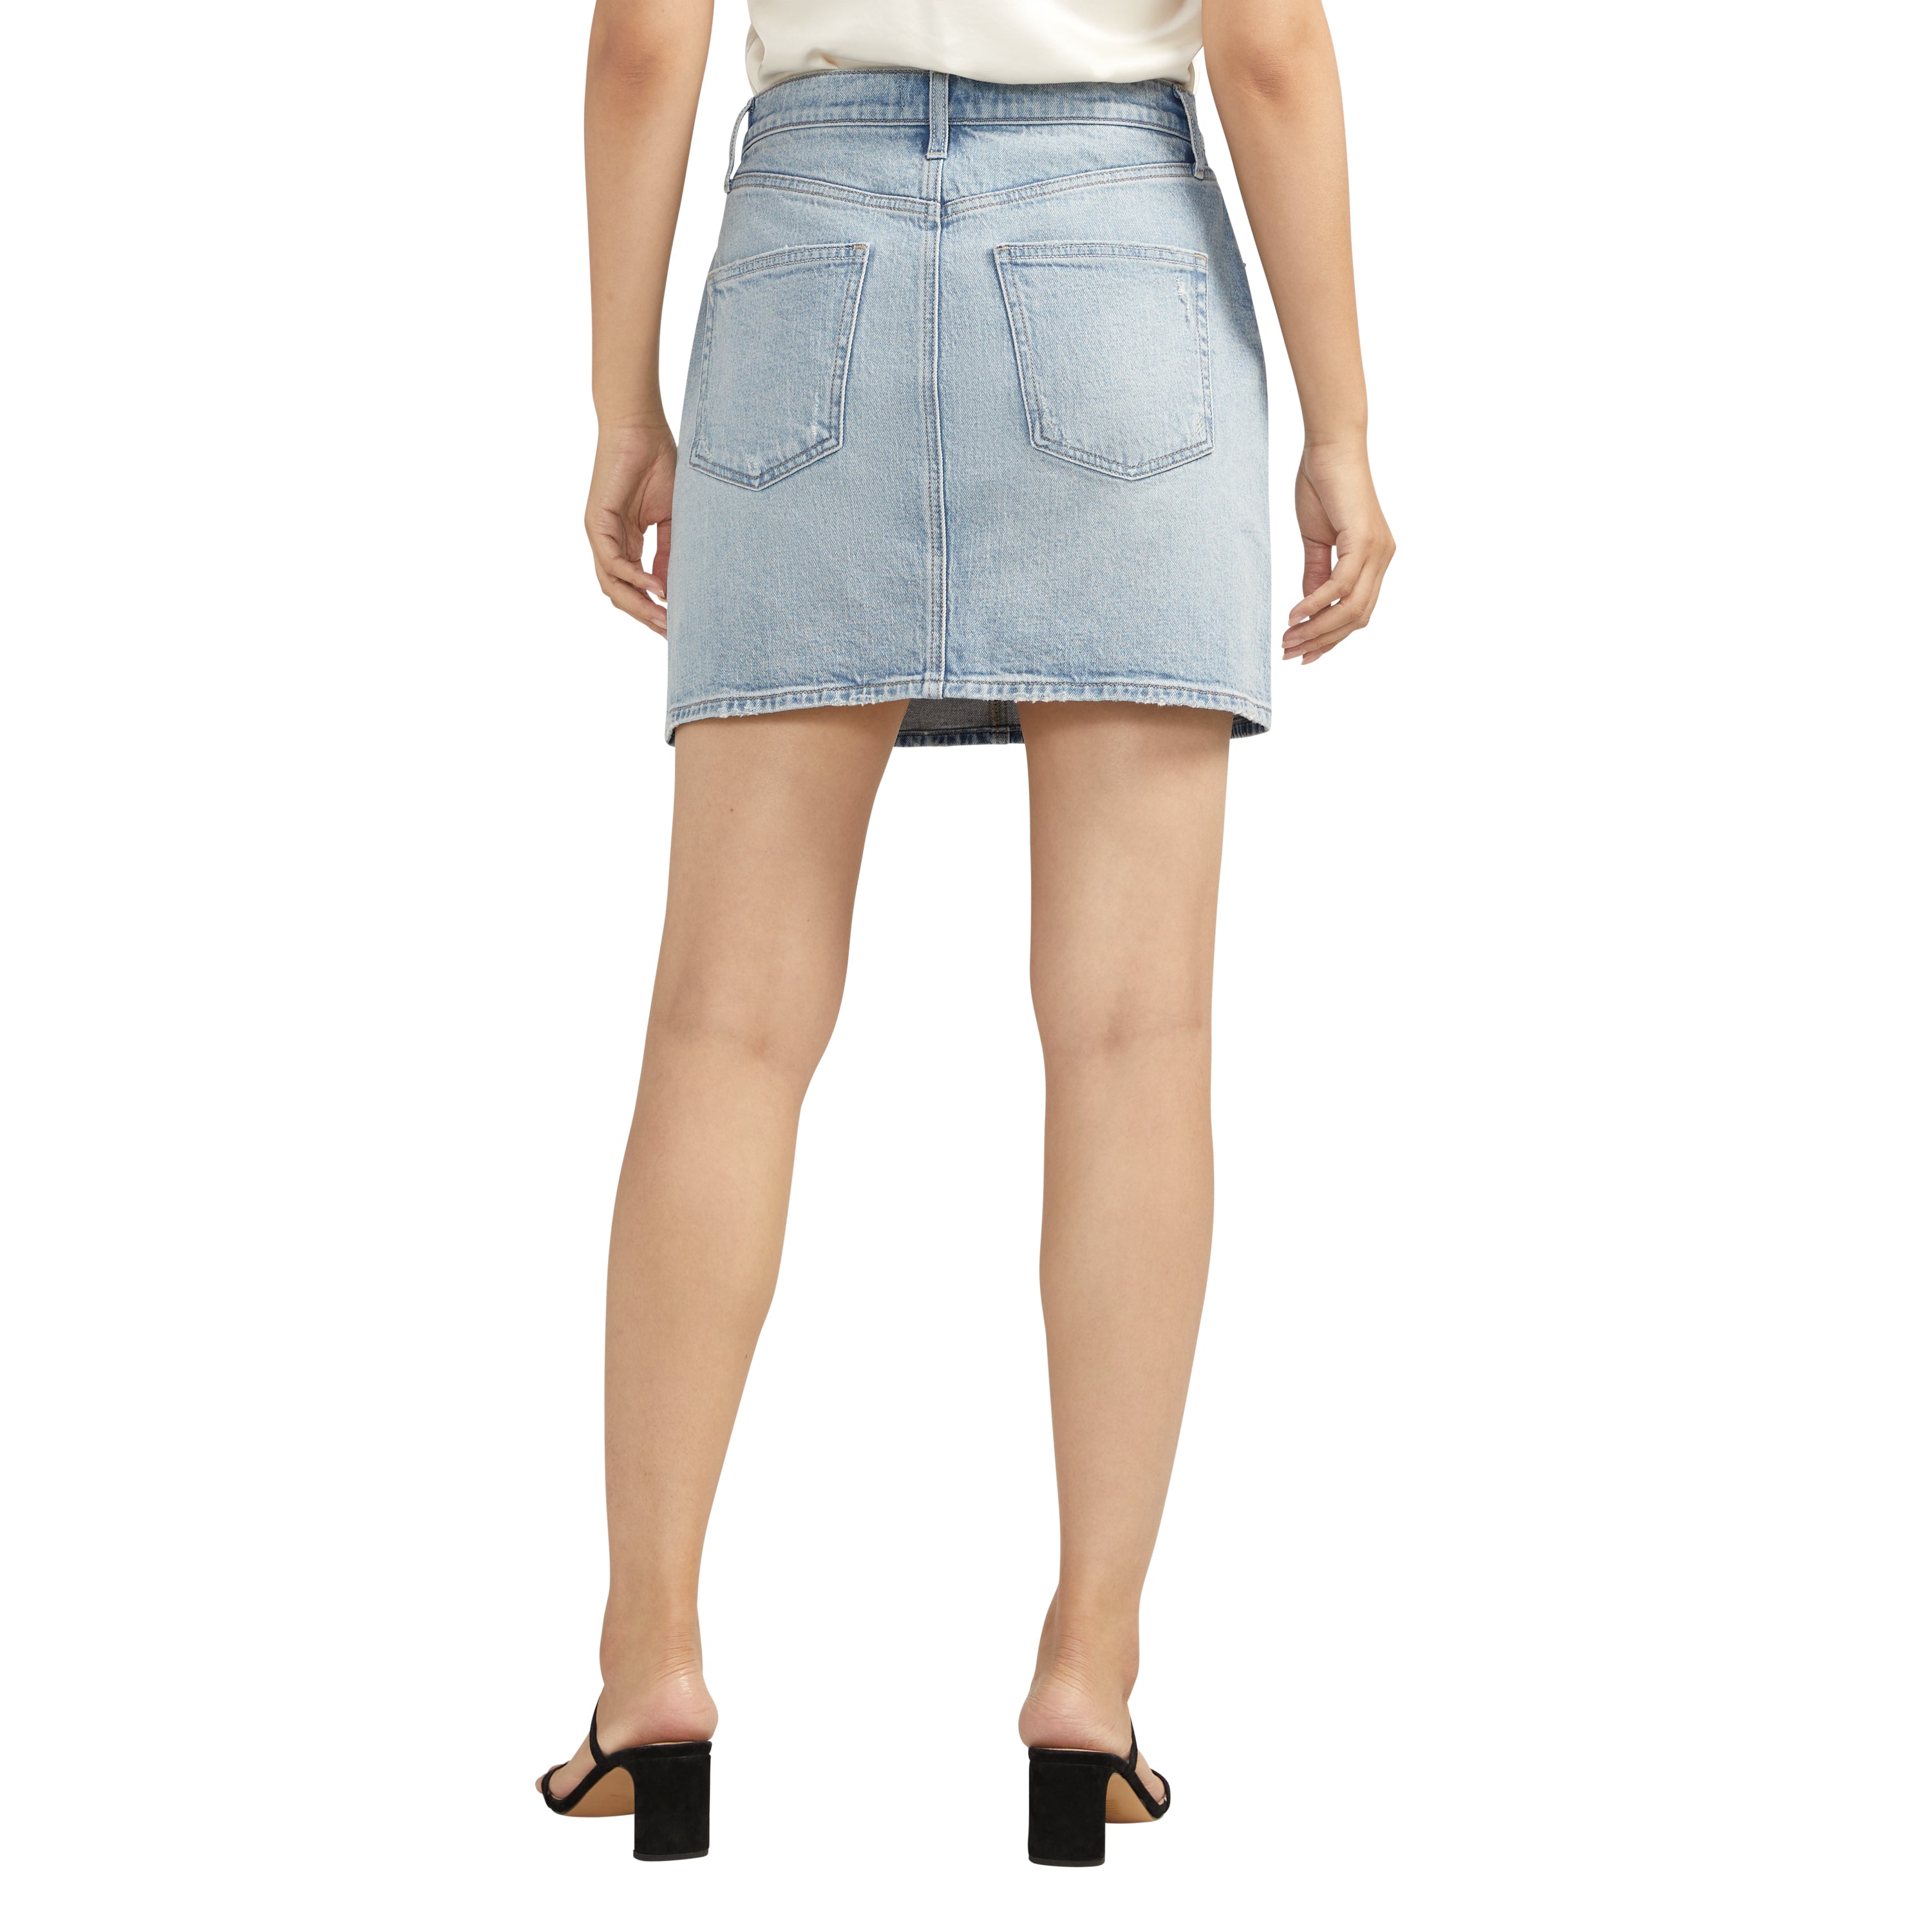 Silver Jeans - Highly Desirable Mini Skirt in Faded Blue